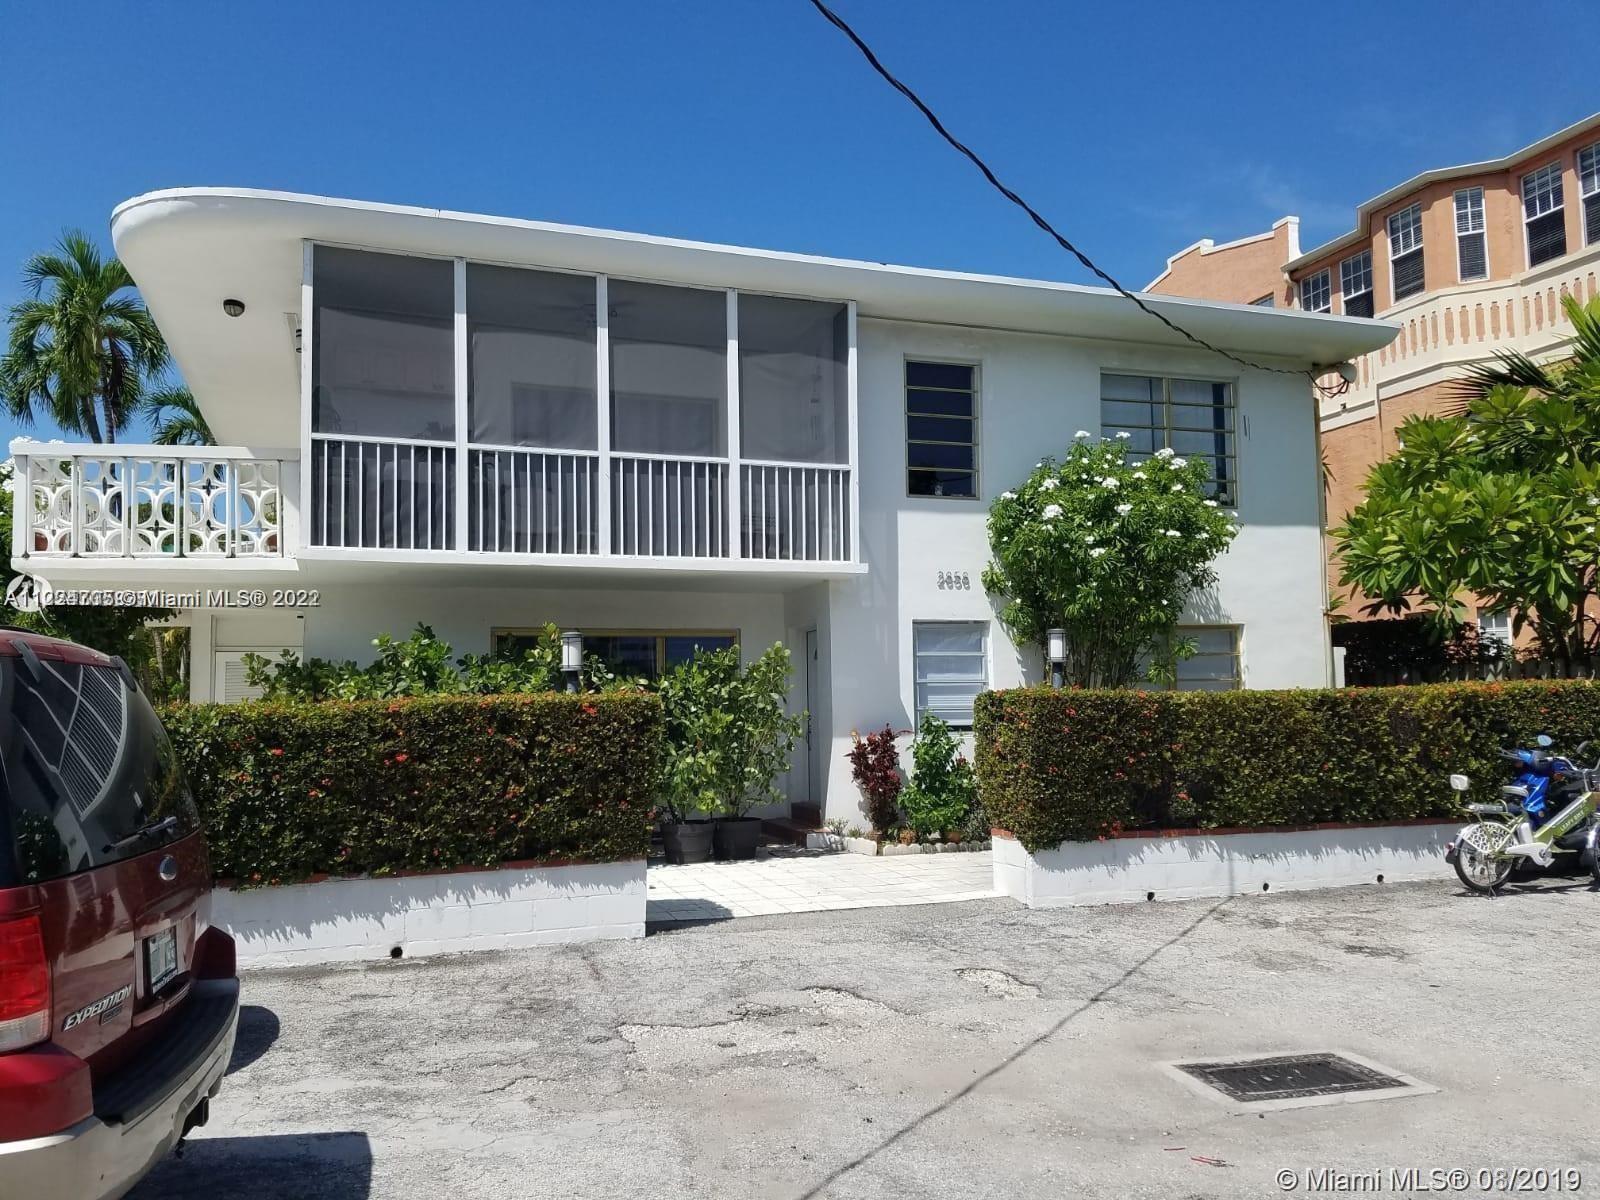 3 BEDROOM 2 BATH 1124 SQ FT HIDDEN GEM FOR SALE ON MIAMI BEACH'S MOST CHARMING STREET, PINTREE DR. D